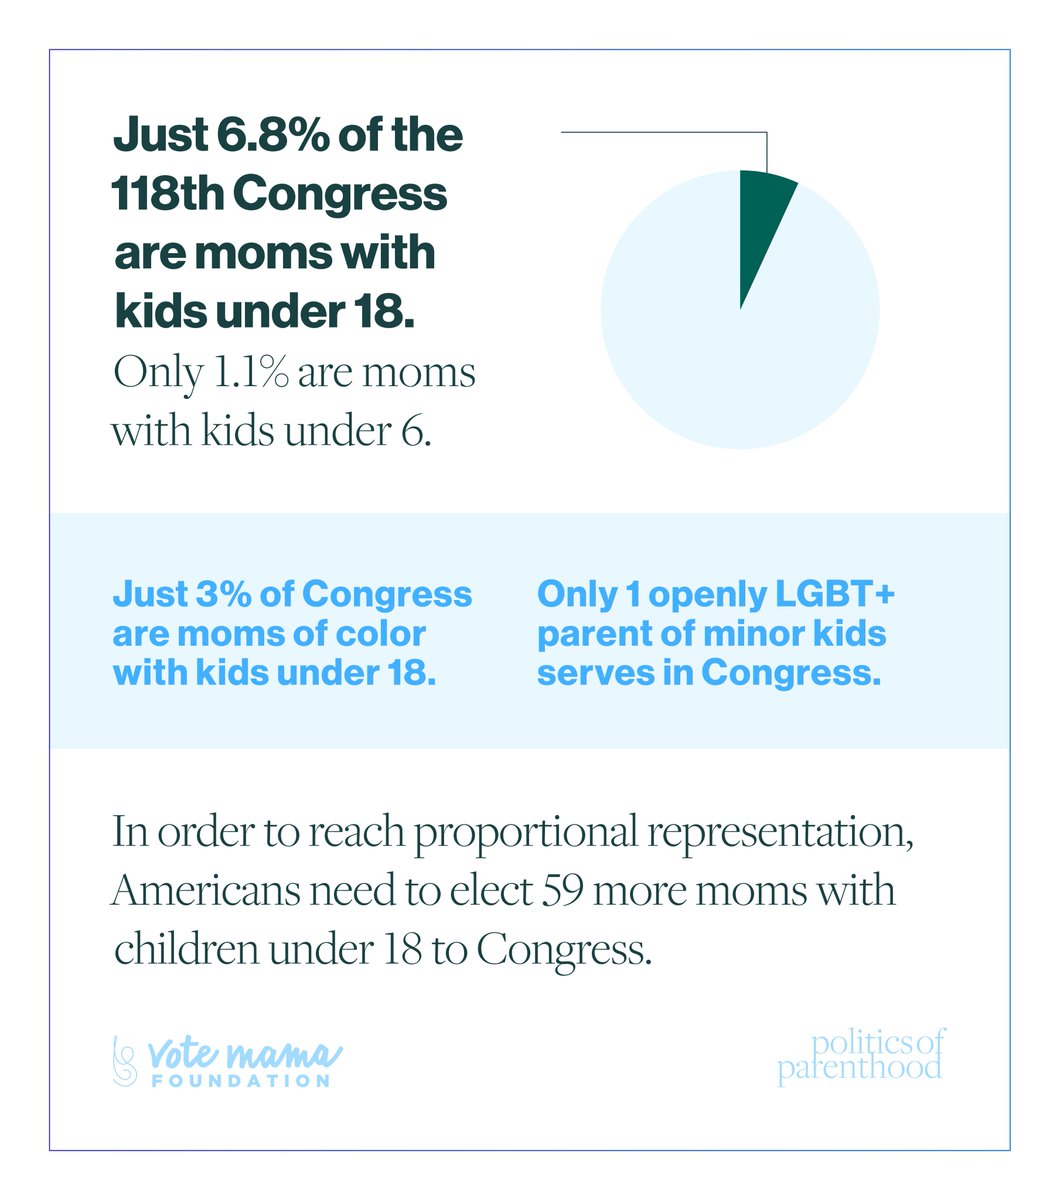 Only 6.8% of Congress are moms with minor kids. Just 3% are moms of color with minor kids. Just 1% are moms with kids under 6. Our new #PoliticsOfParenthood report shows why we need more mamas in Congress. Check it out! votemamafoundation.org/popcongress